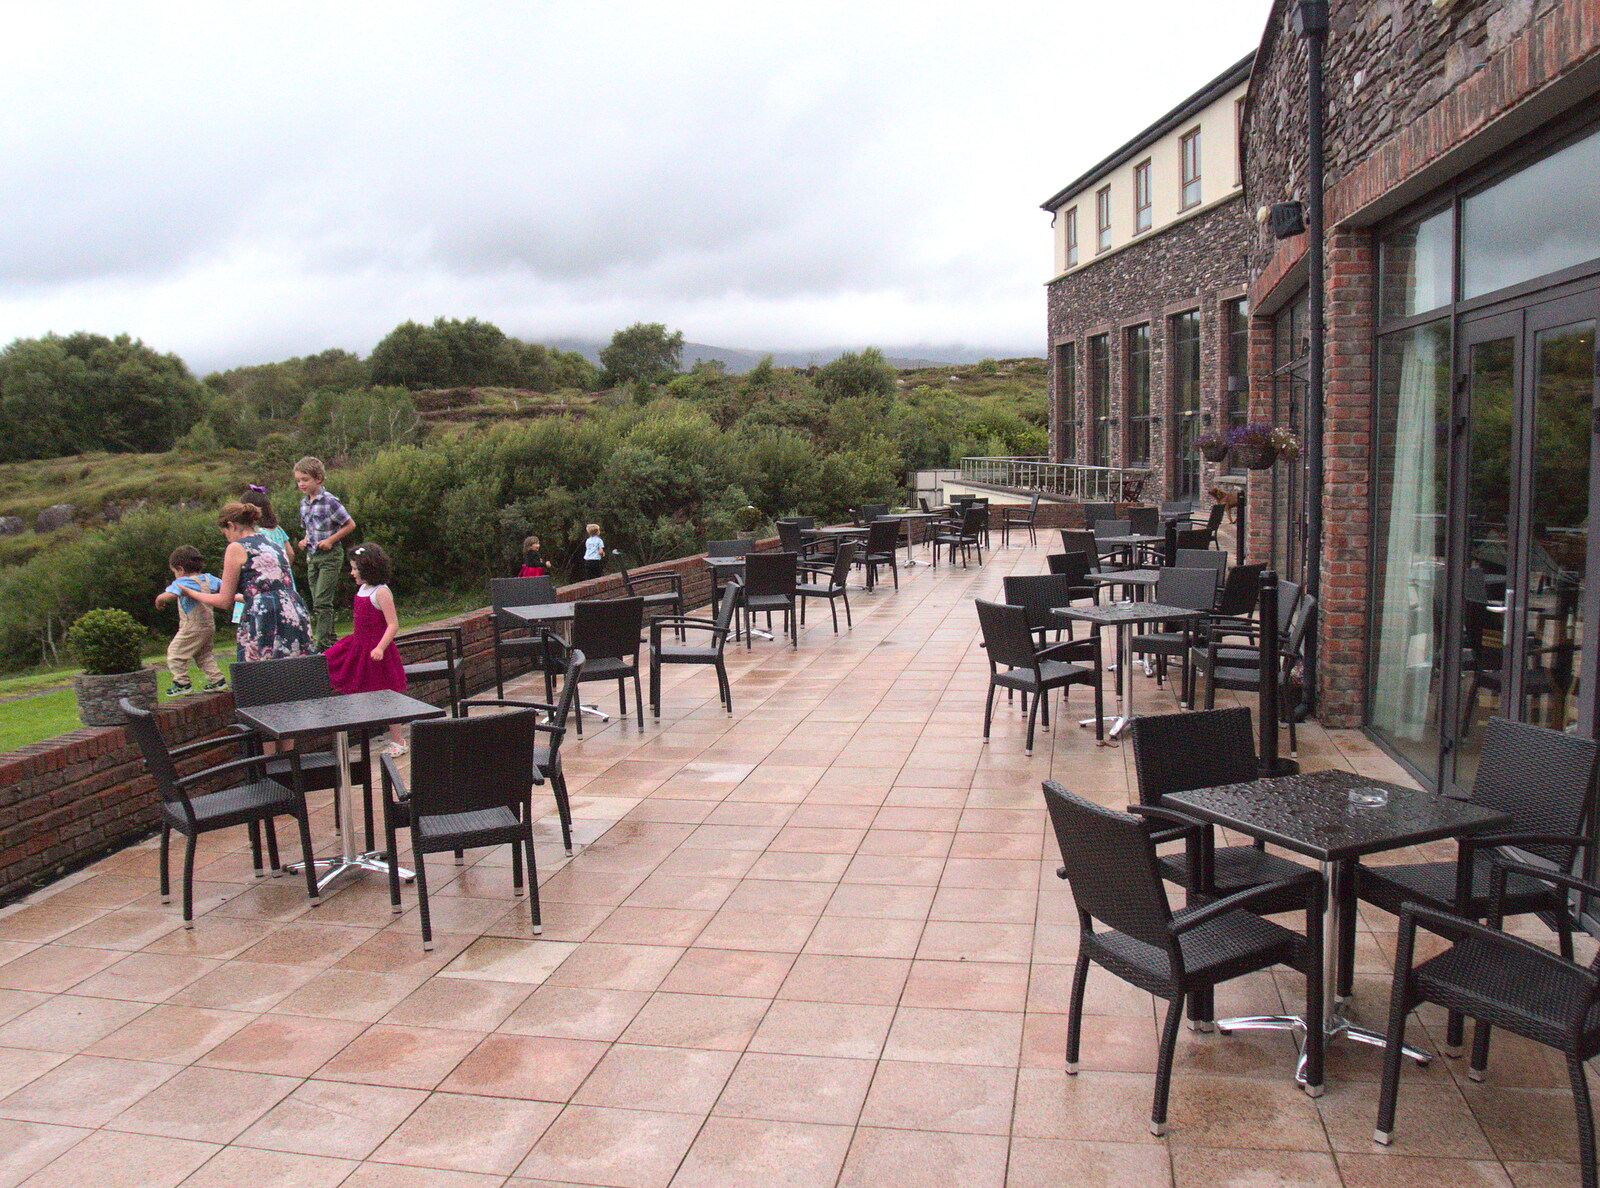 The Sneem Hotel's extensive patio from In The Sneem, An tSnaidhm, Kerry, Ireland - 1st August 2017